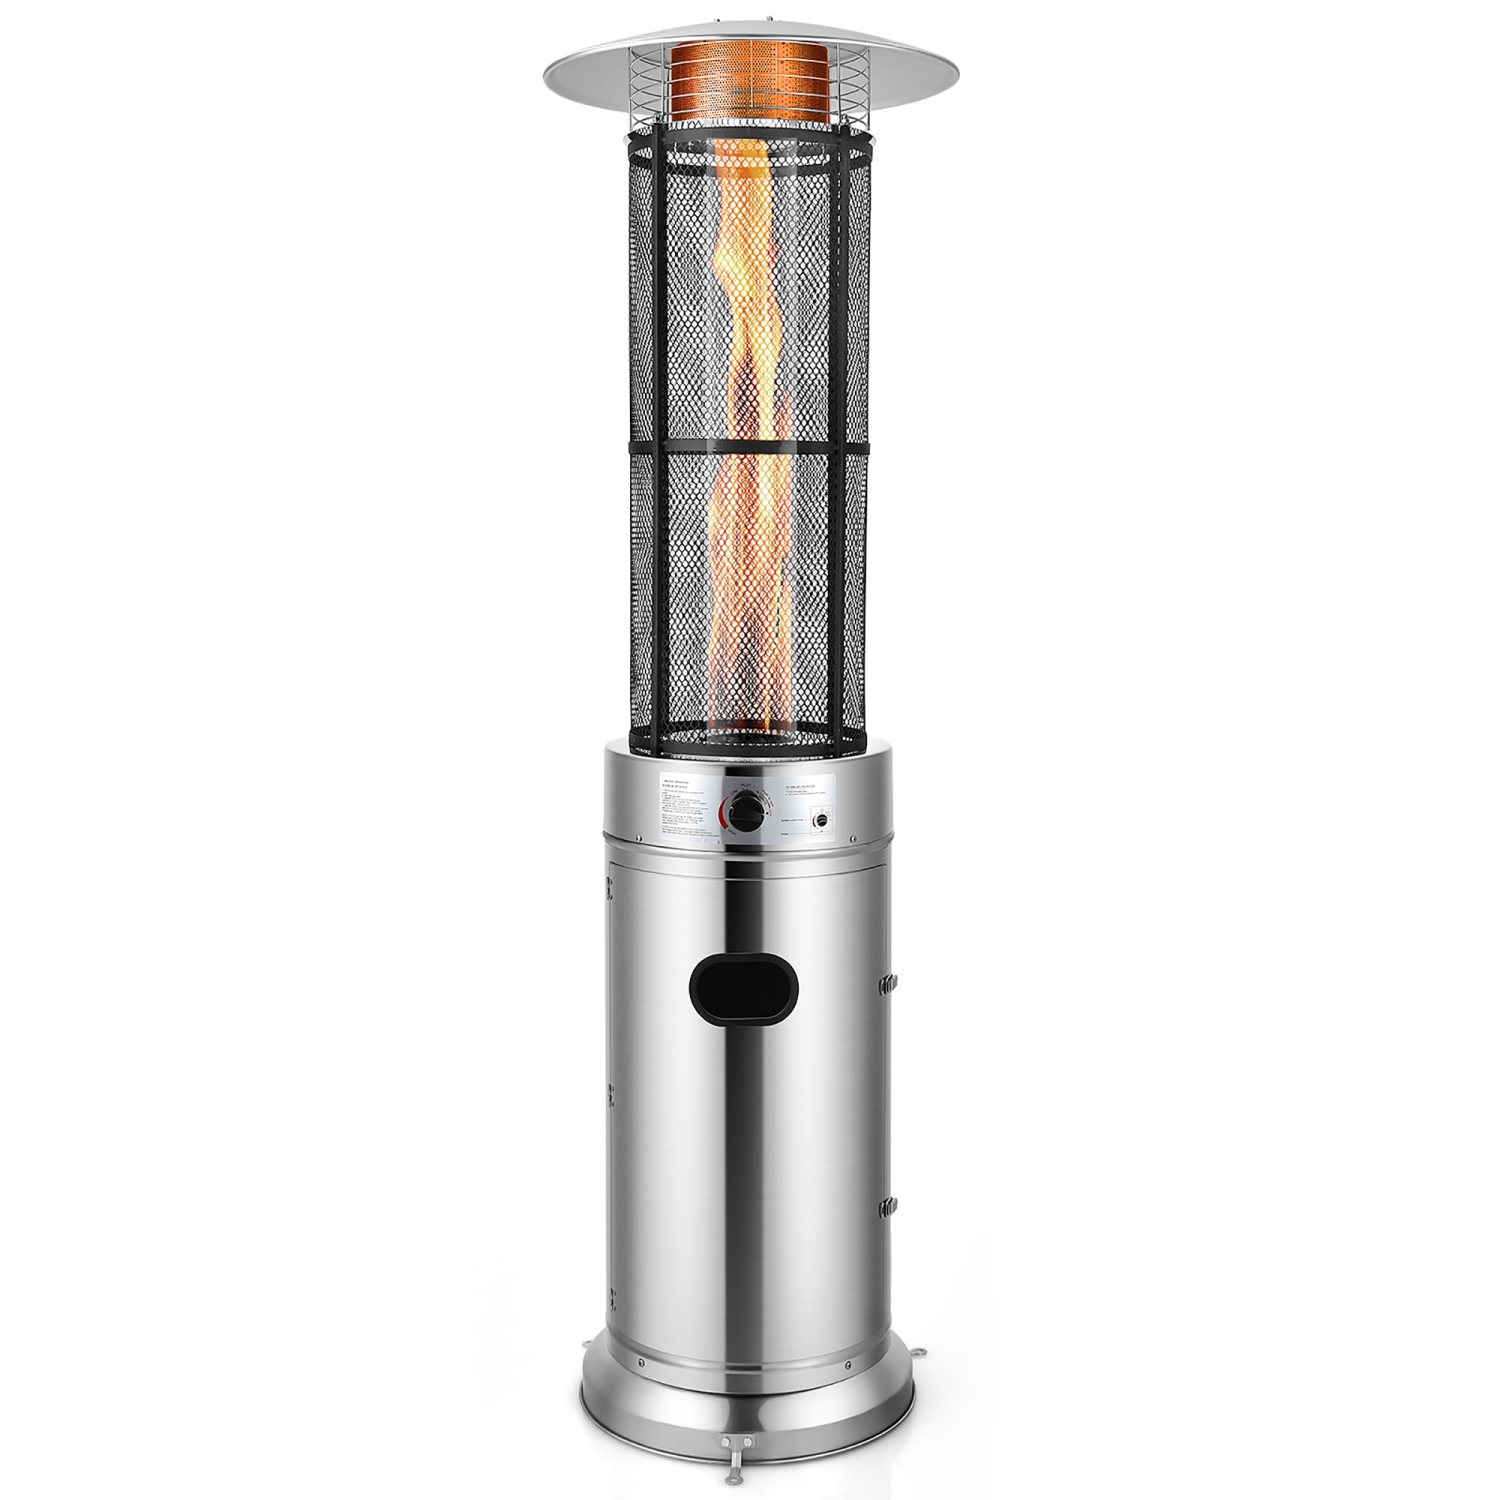 Costway 34000 BTU Patio Heaters Stainless Steel Round Propane Glass Tube Flame W/Wheels